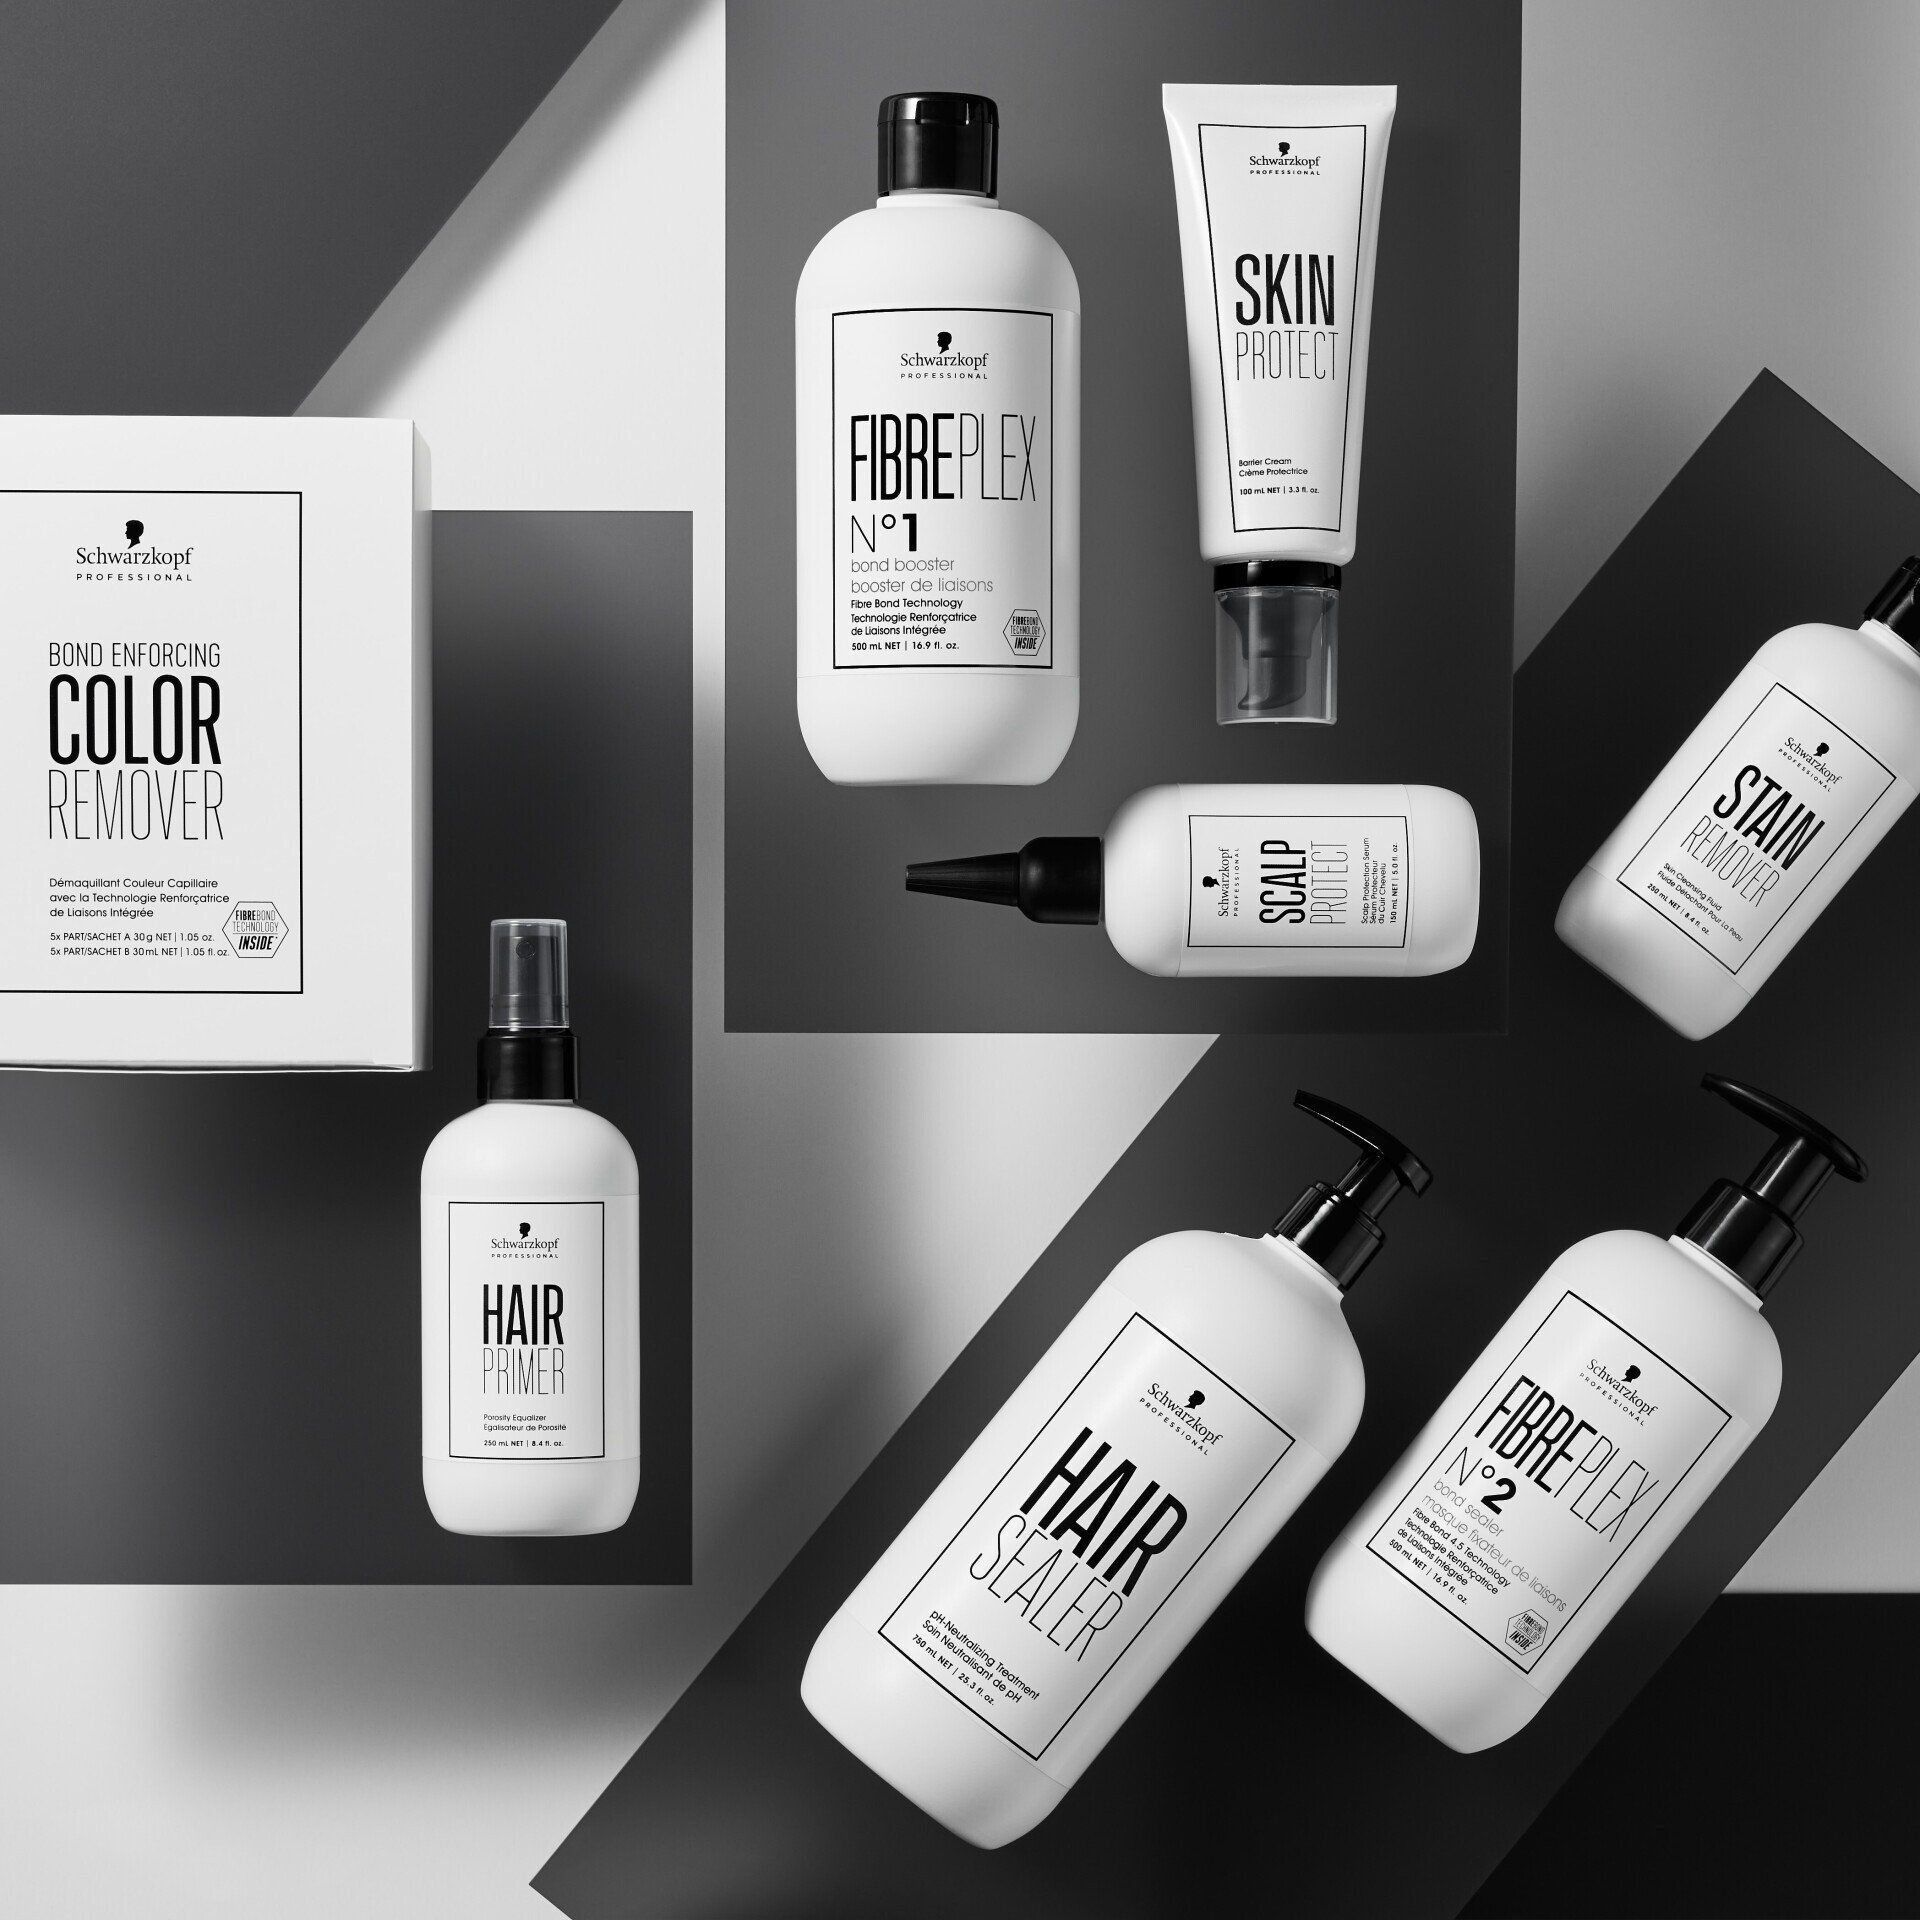 Schwarzkopf professional colour enablers available at Collective hairdressing